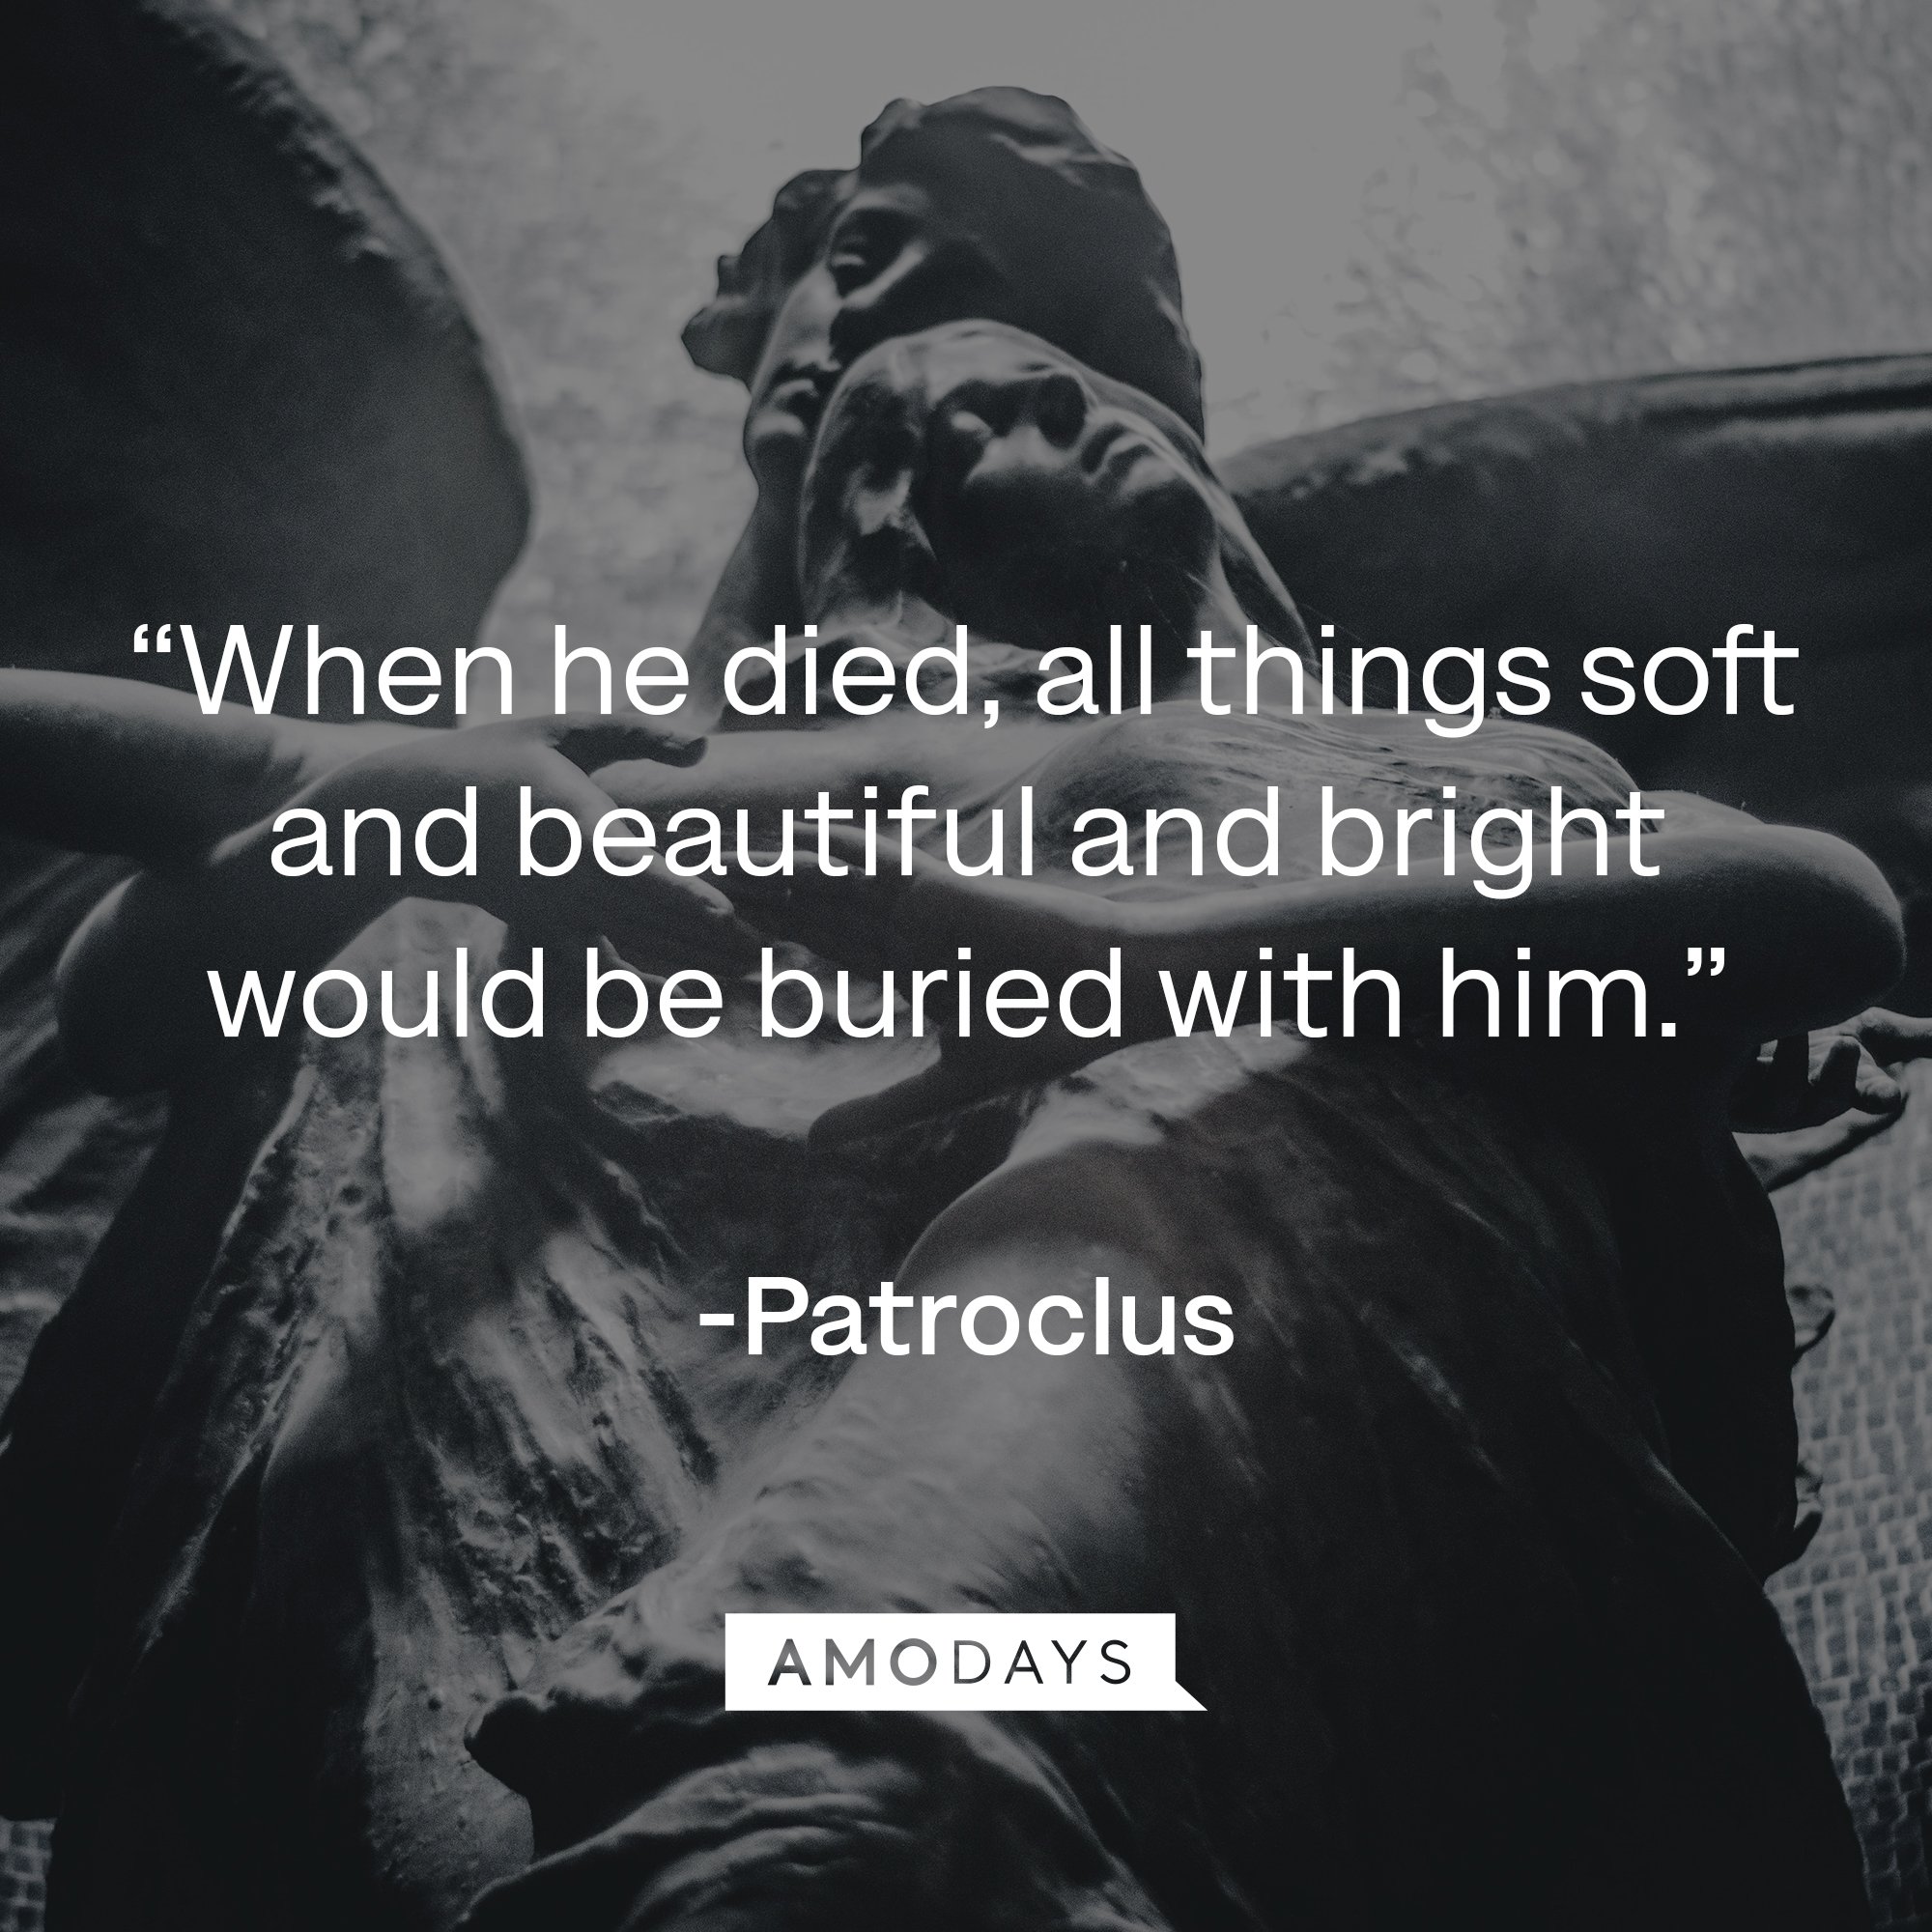 Patroclus's quote: “When he died, all things soft and beautiful and bright would be buried with him.” | Image: Amodays